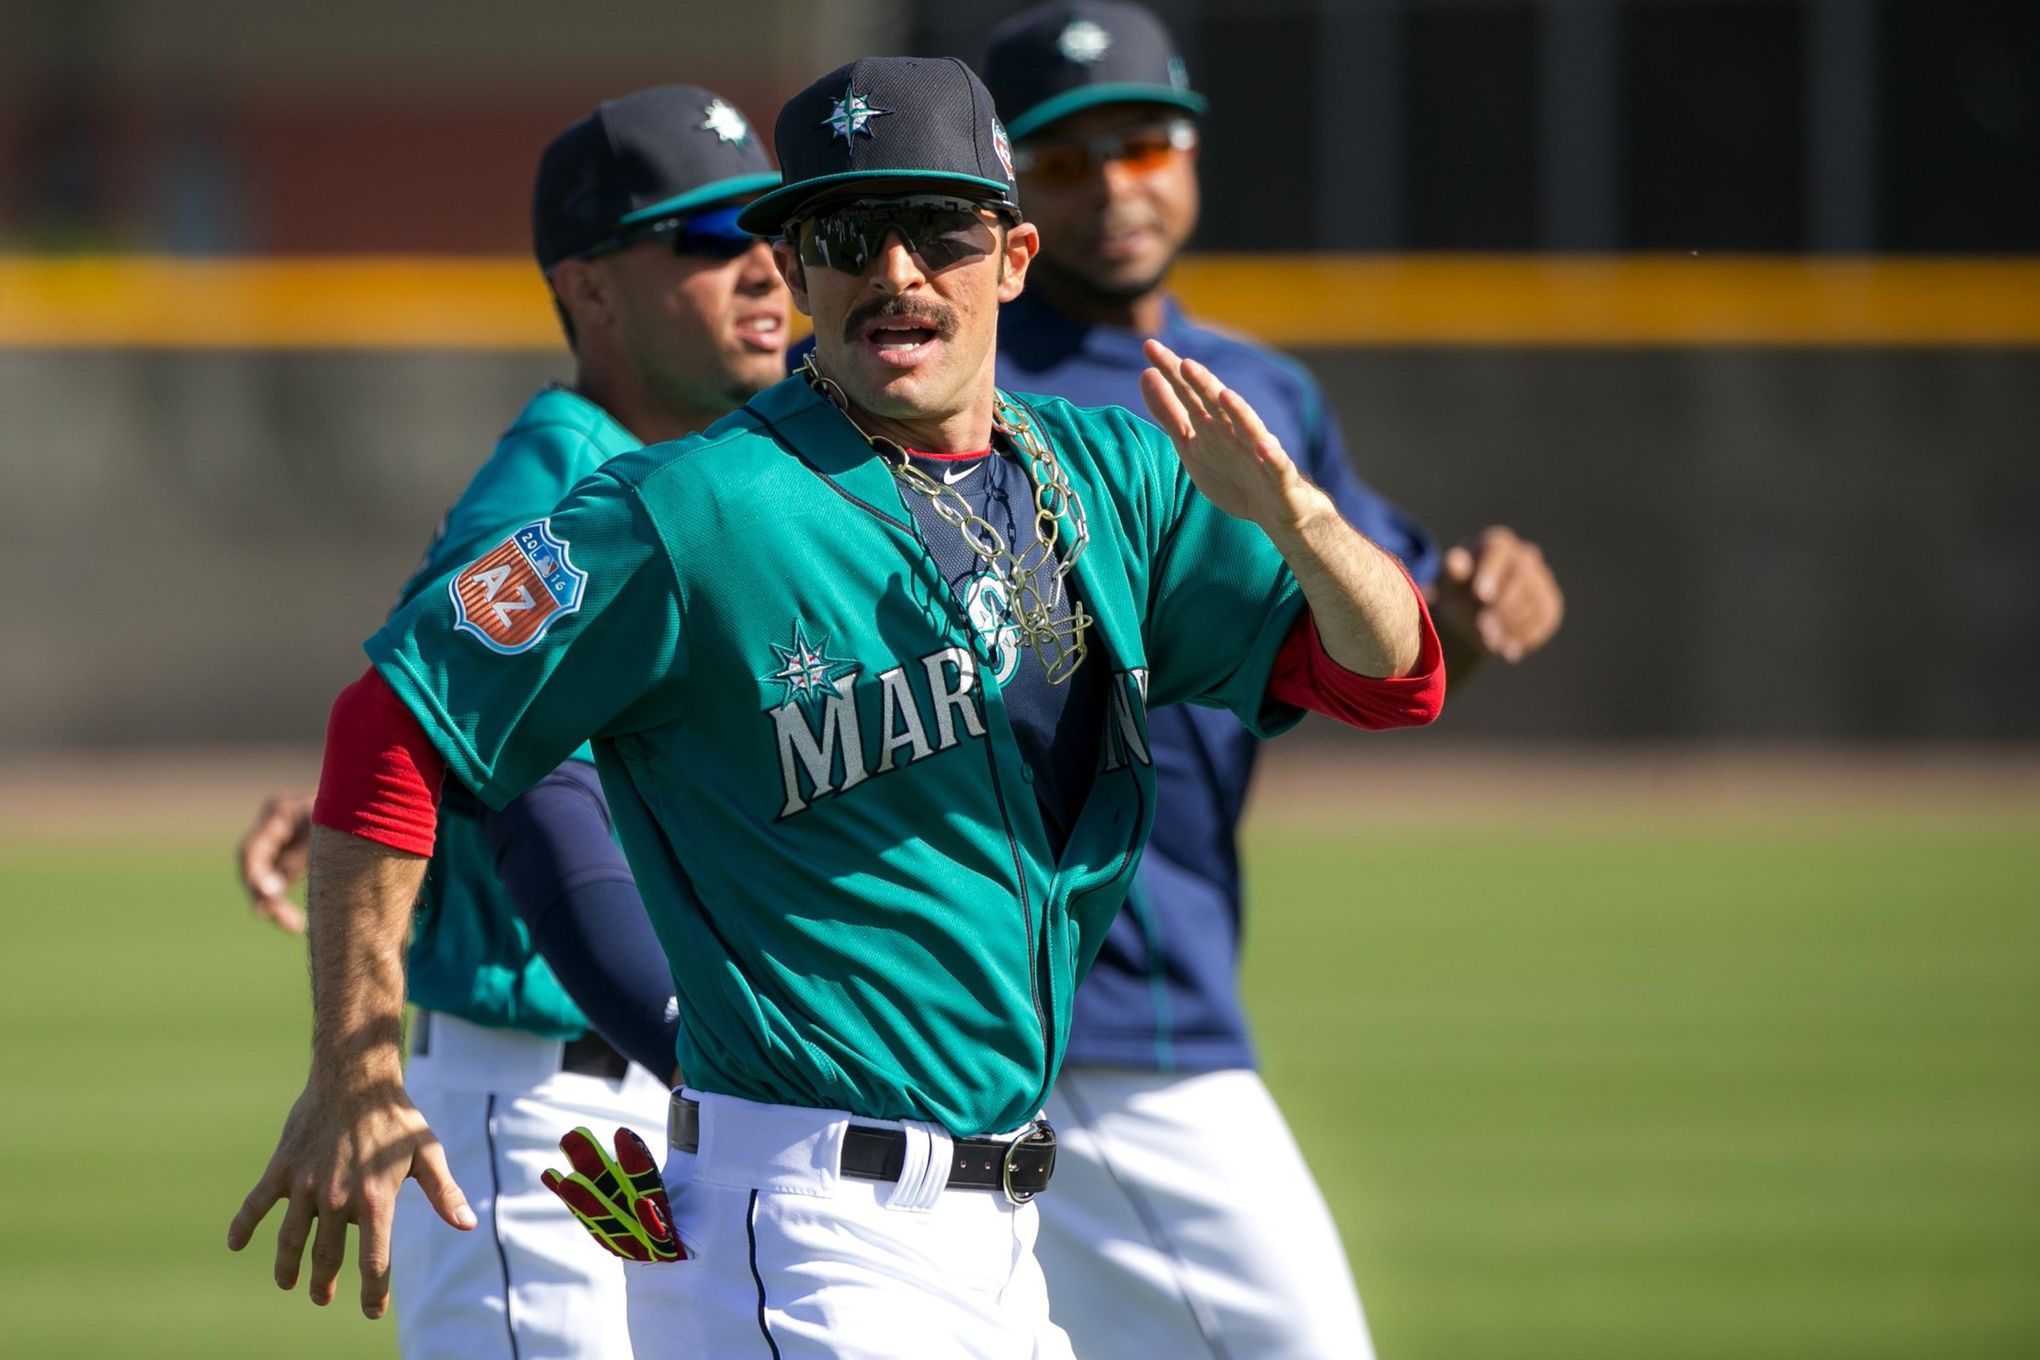 Photos from Mariners spring training on Wednesday, March 16